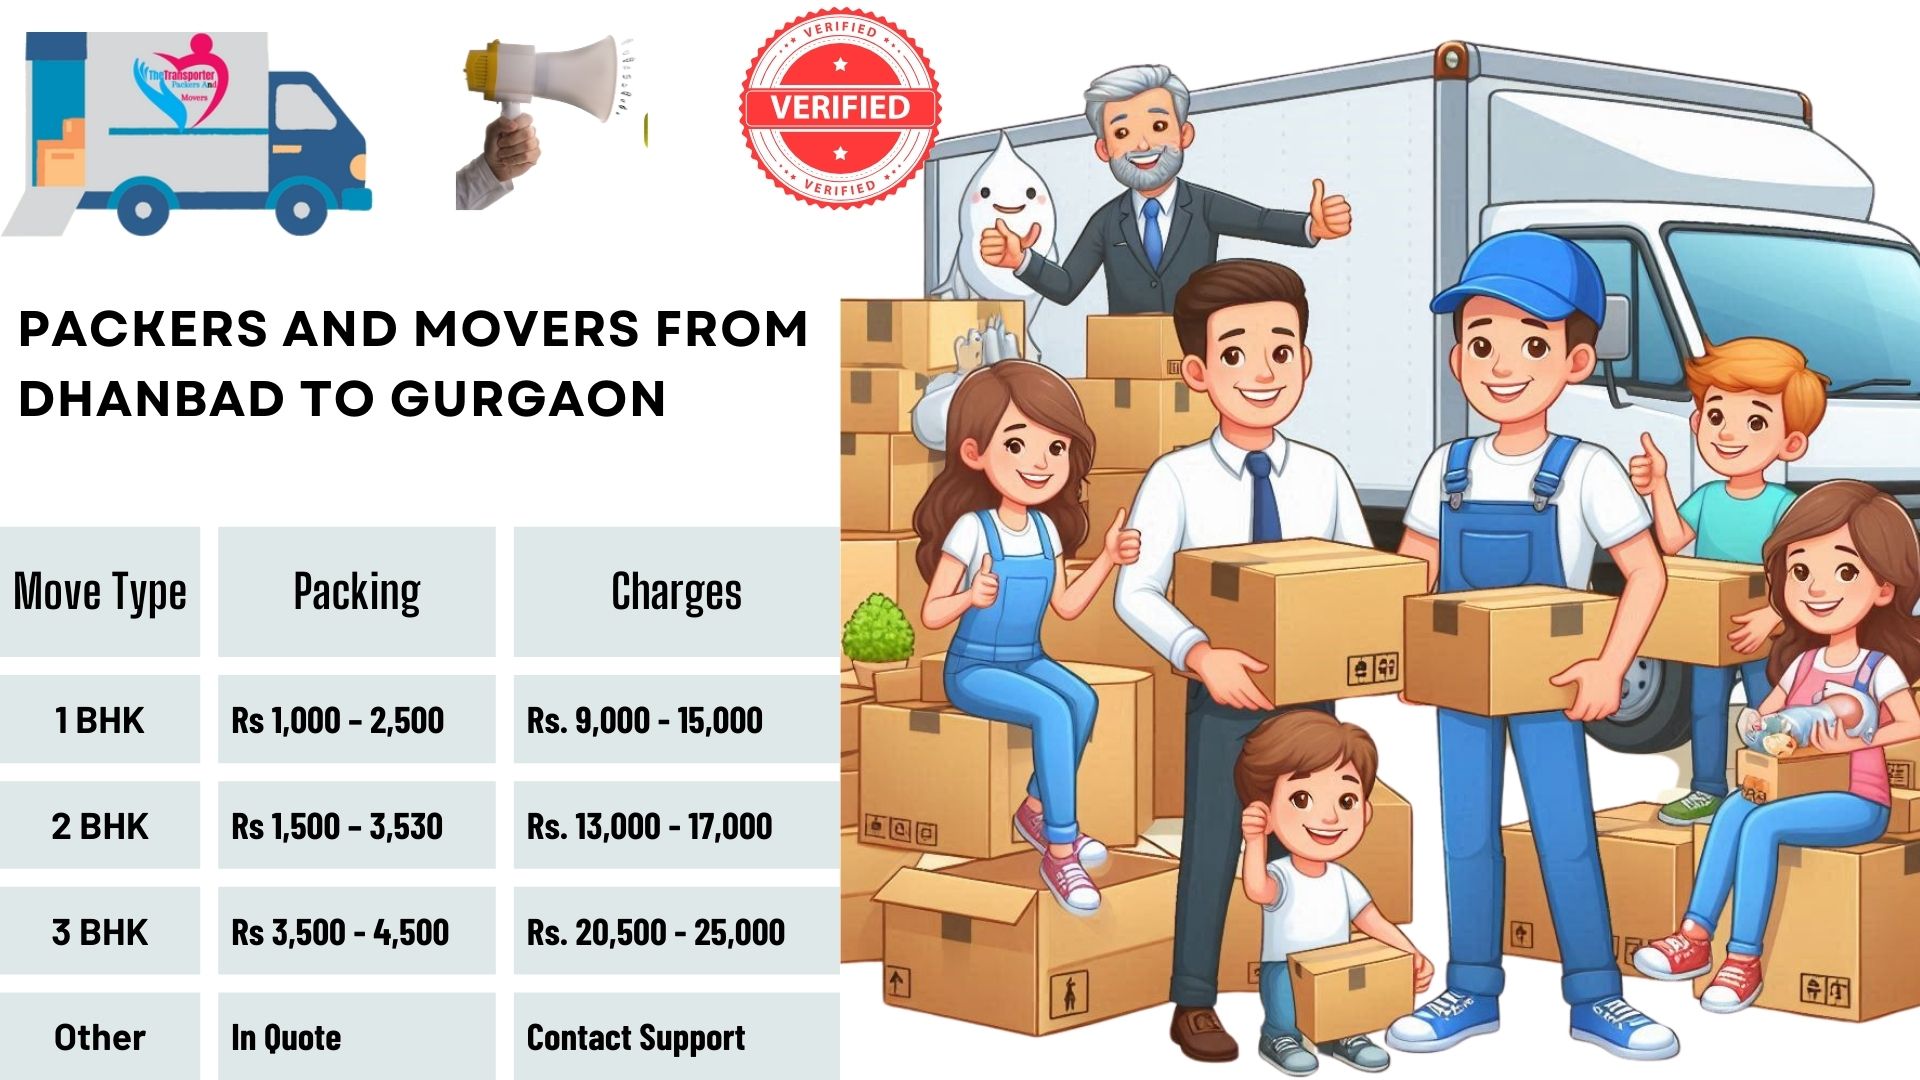 Your household goods shifting from Dhanbad to Gurgaon